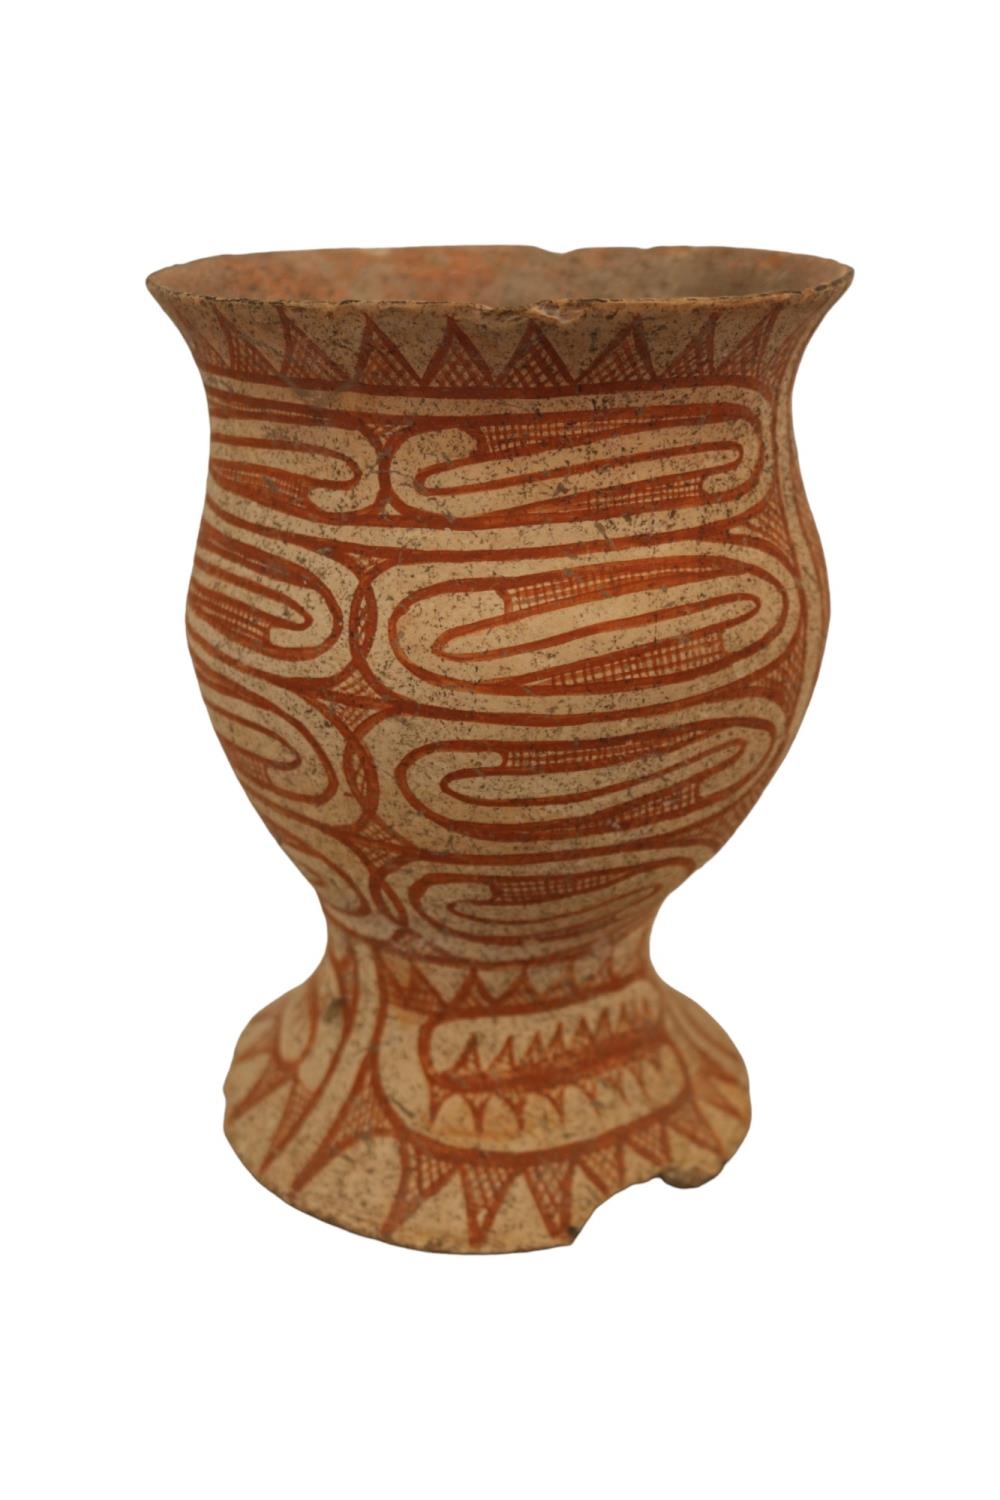 Ban Chiang Thai Ceramic Middle Period 900 - 300 BC. Vase of Ovoid form with flared base with two